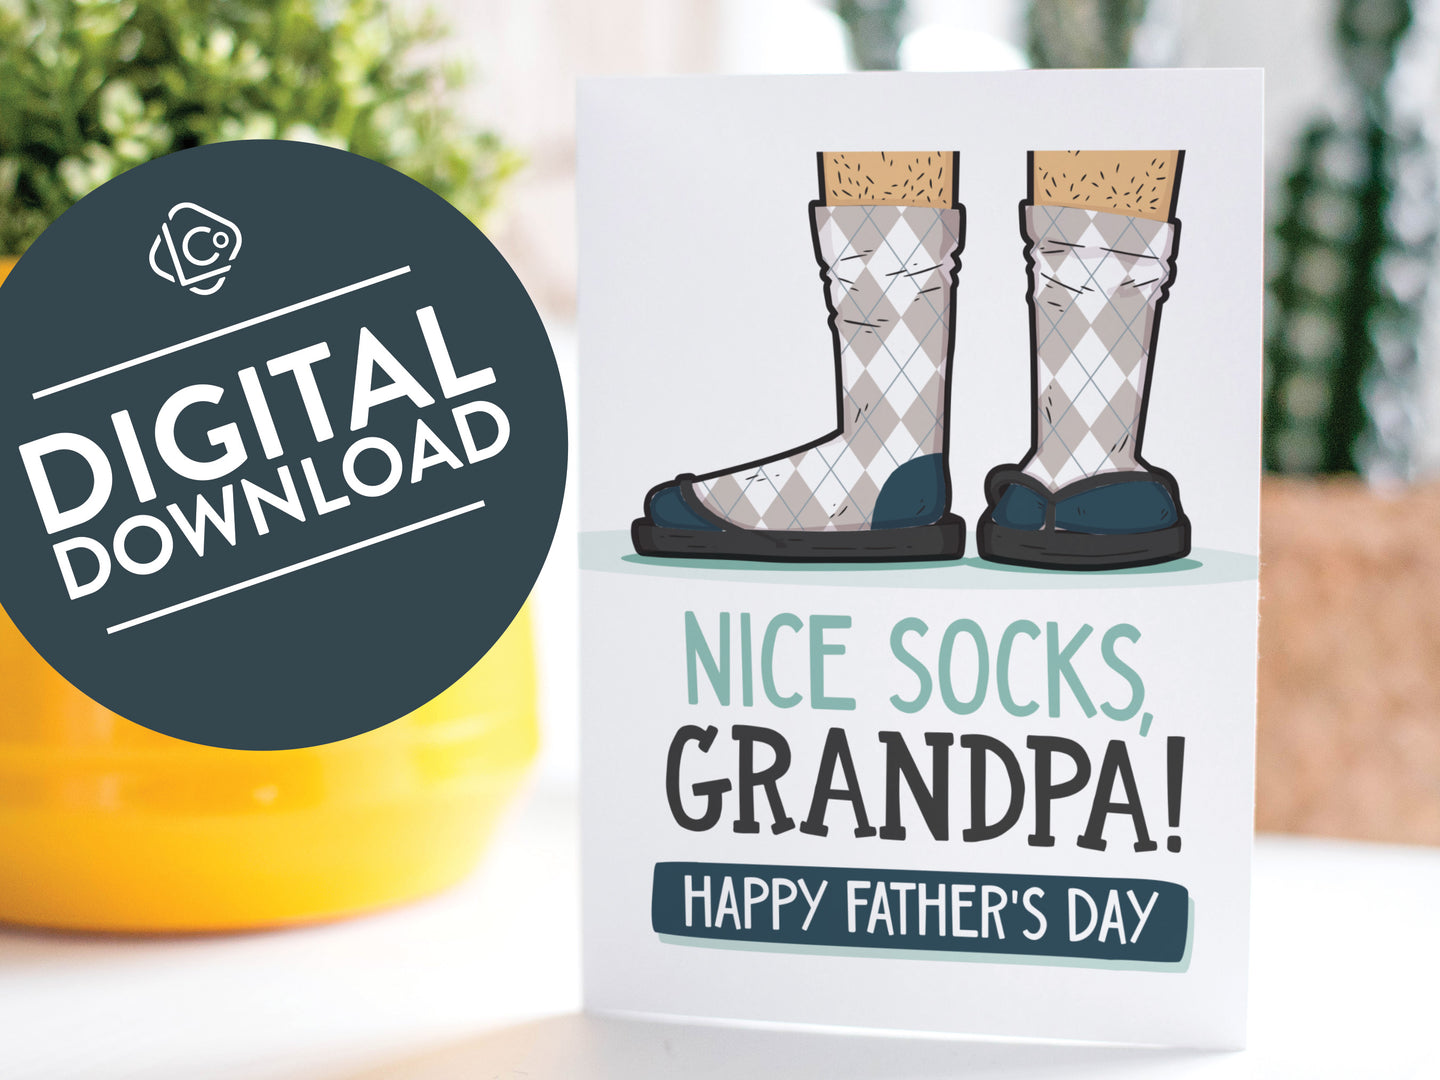 A greeting card is on a table top with a yellow plant pot and a green plant inside. The card features the words “Nice Socks Grandpa, Happy Father’s Day” with an illustrated of legs with patterned socks and shoes. The words 